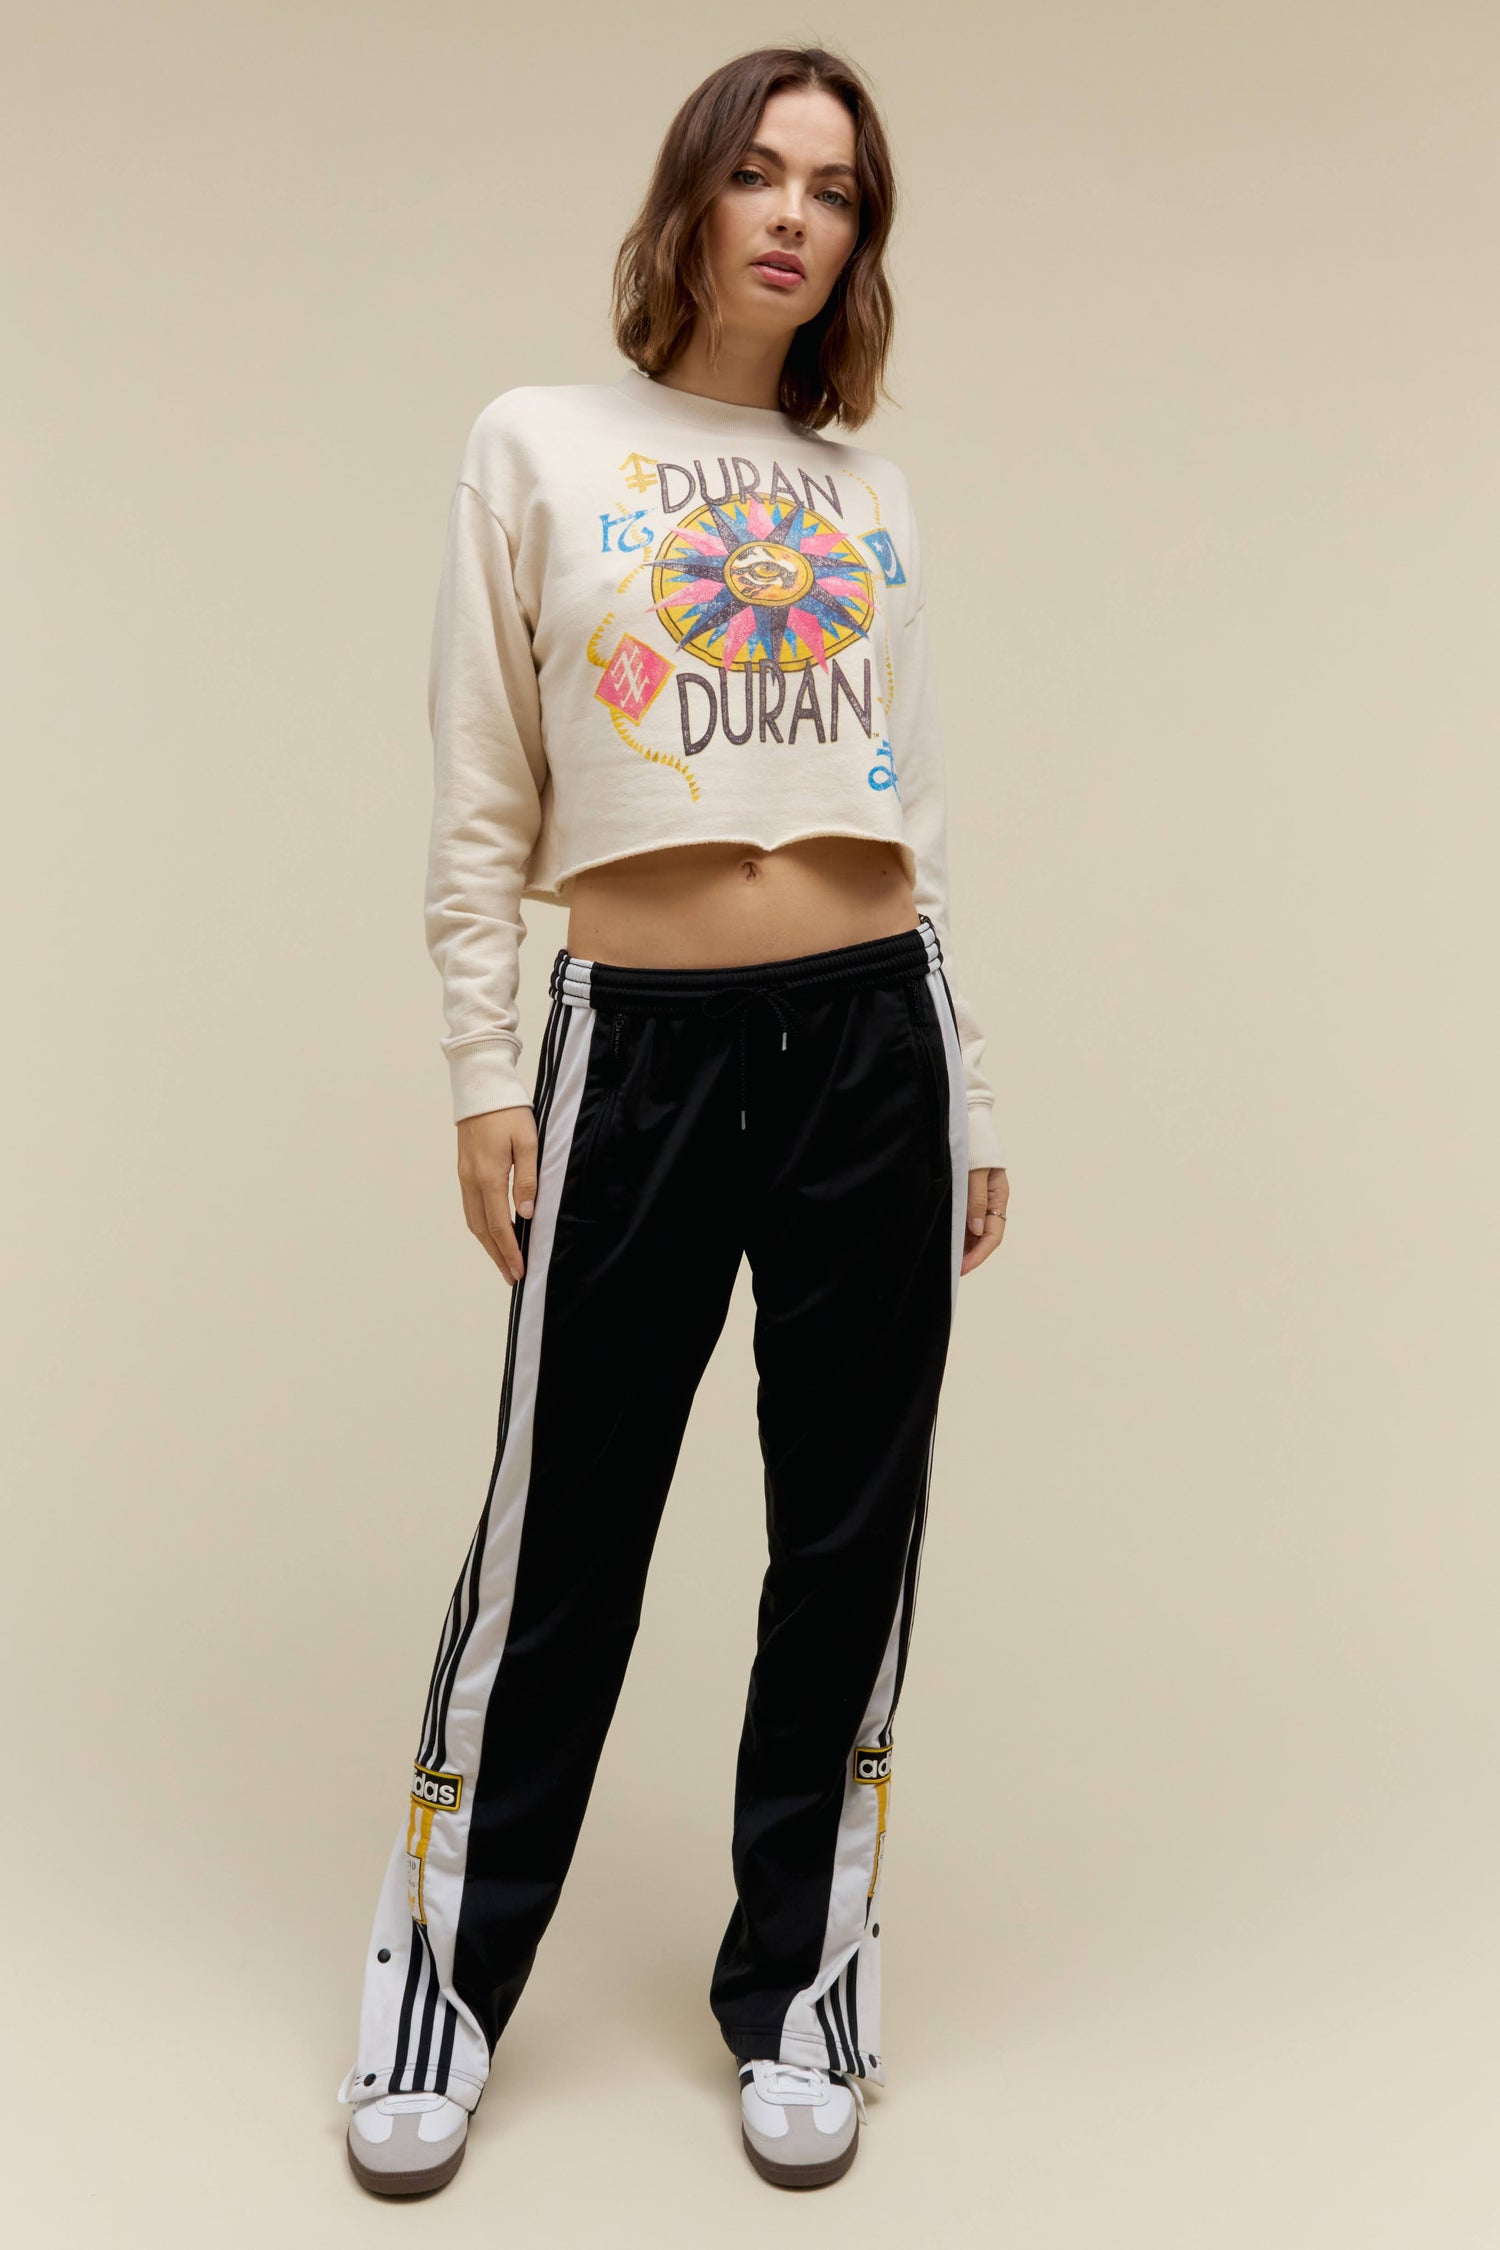 A model featuring a white cropped sweatshirt stamped  with 'Duran Duran'.